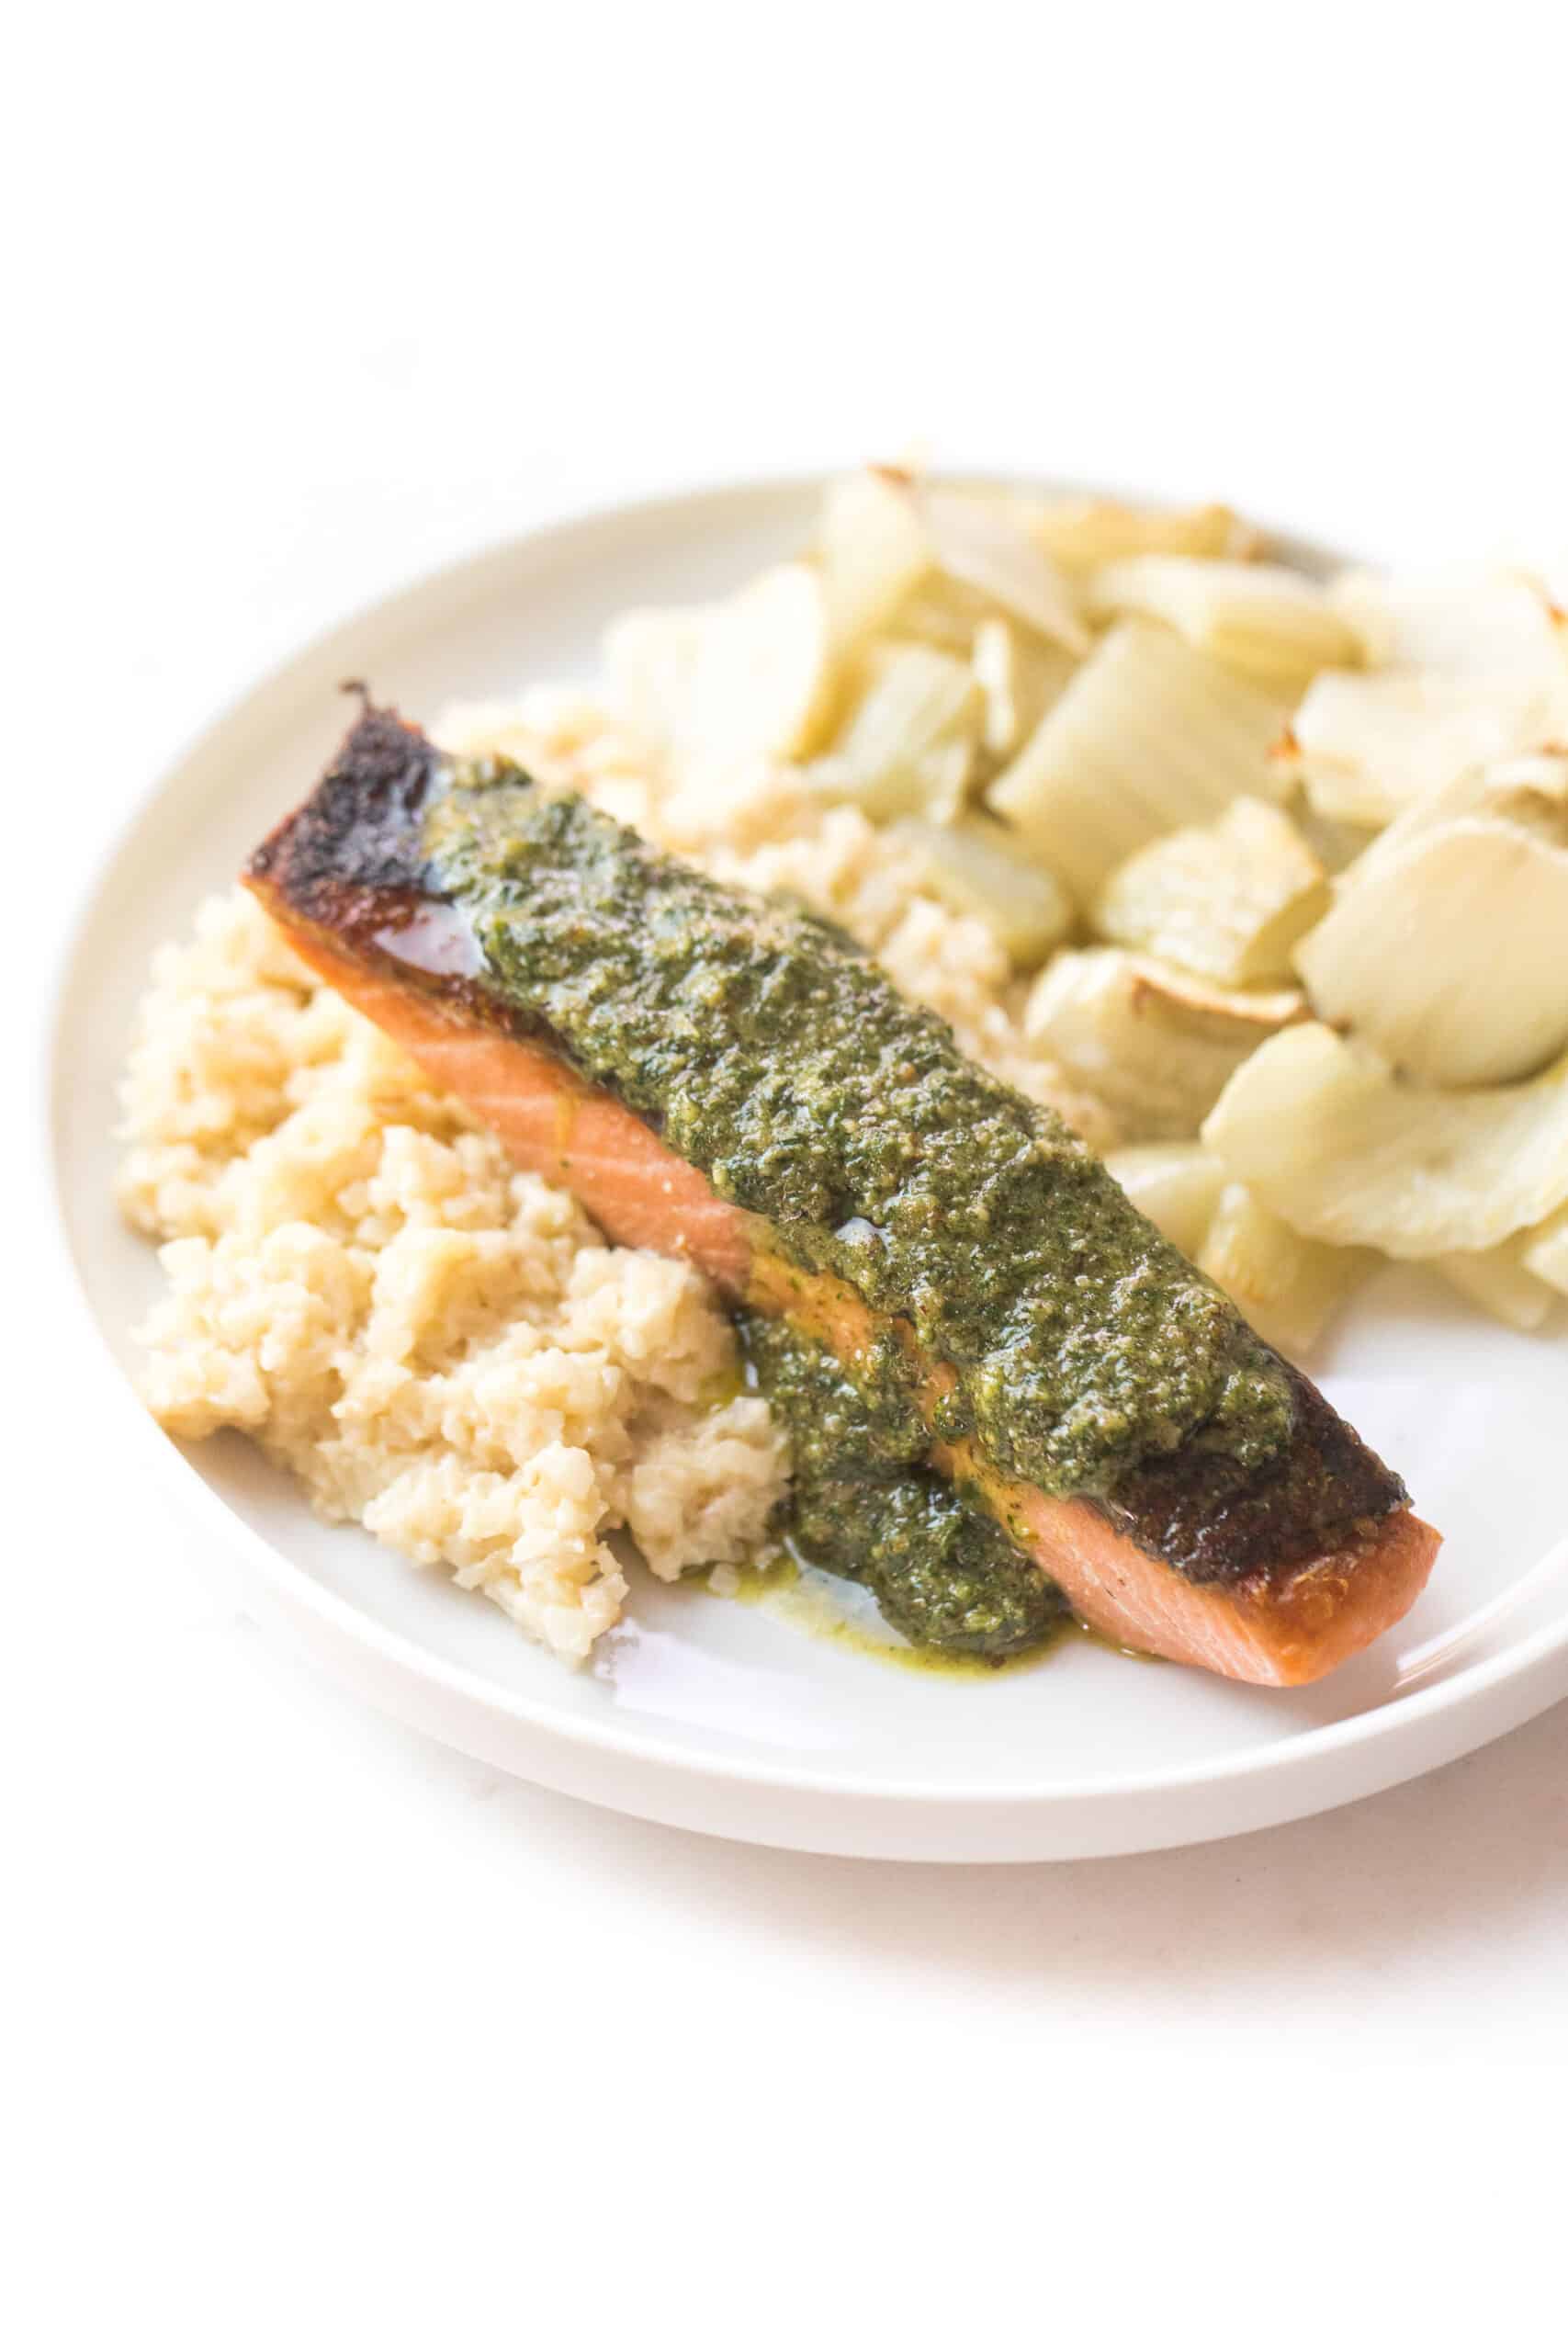 salmon topped with a green sauce on a white plate and background